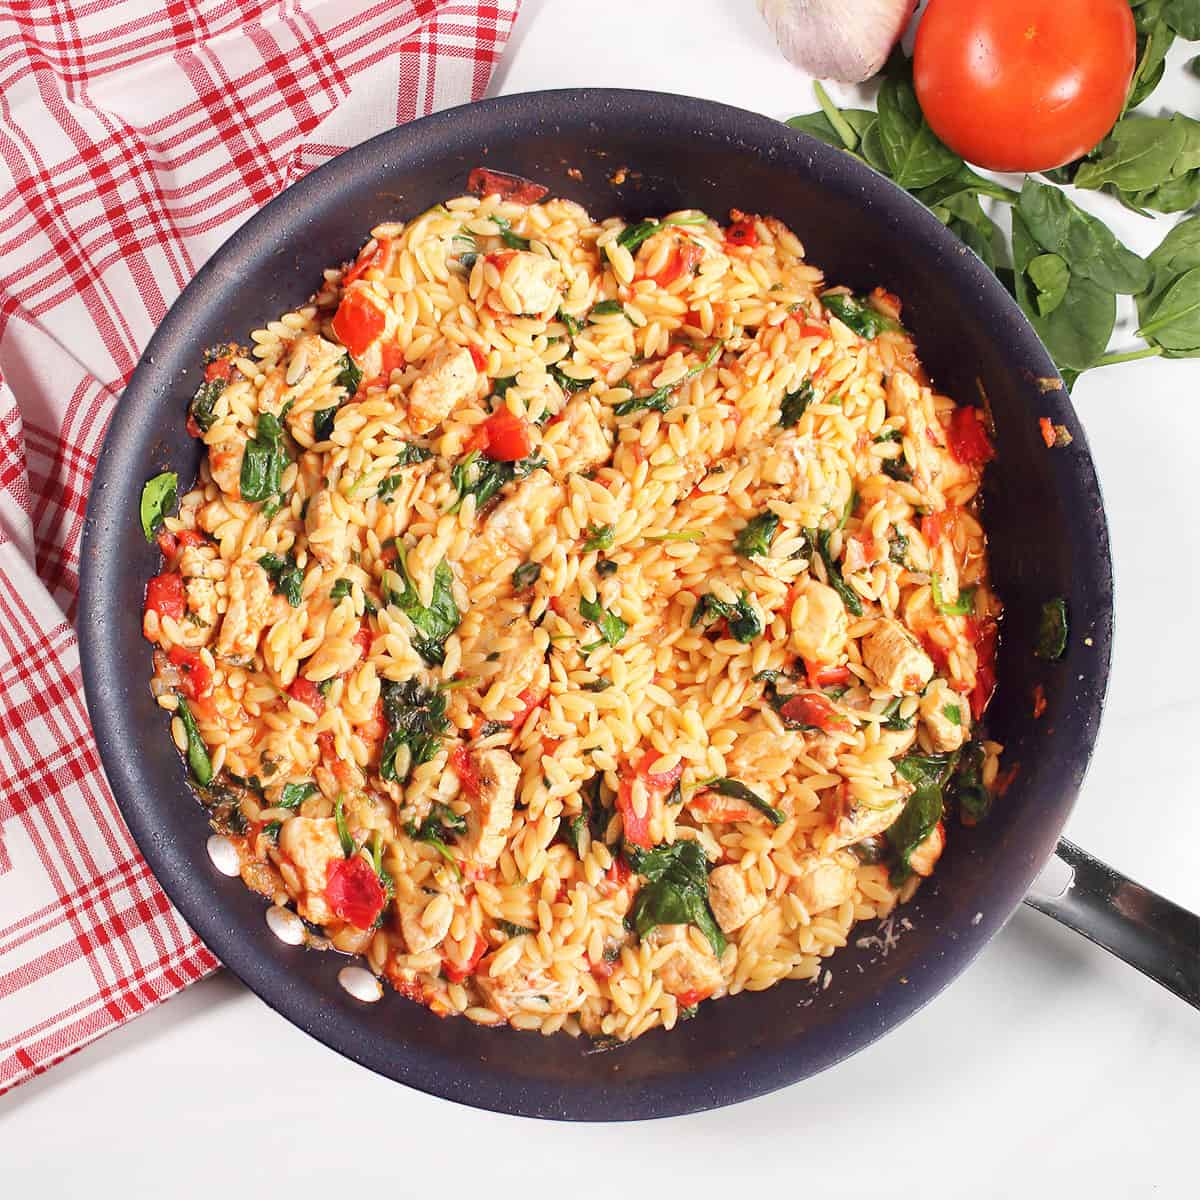 Chicken and Orzo Skillet with tomatoes and red checkered towel.